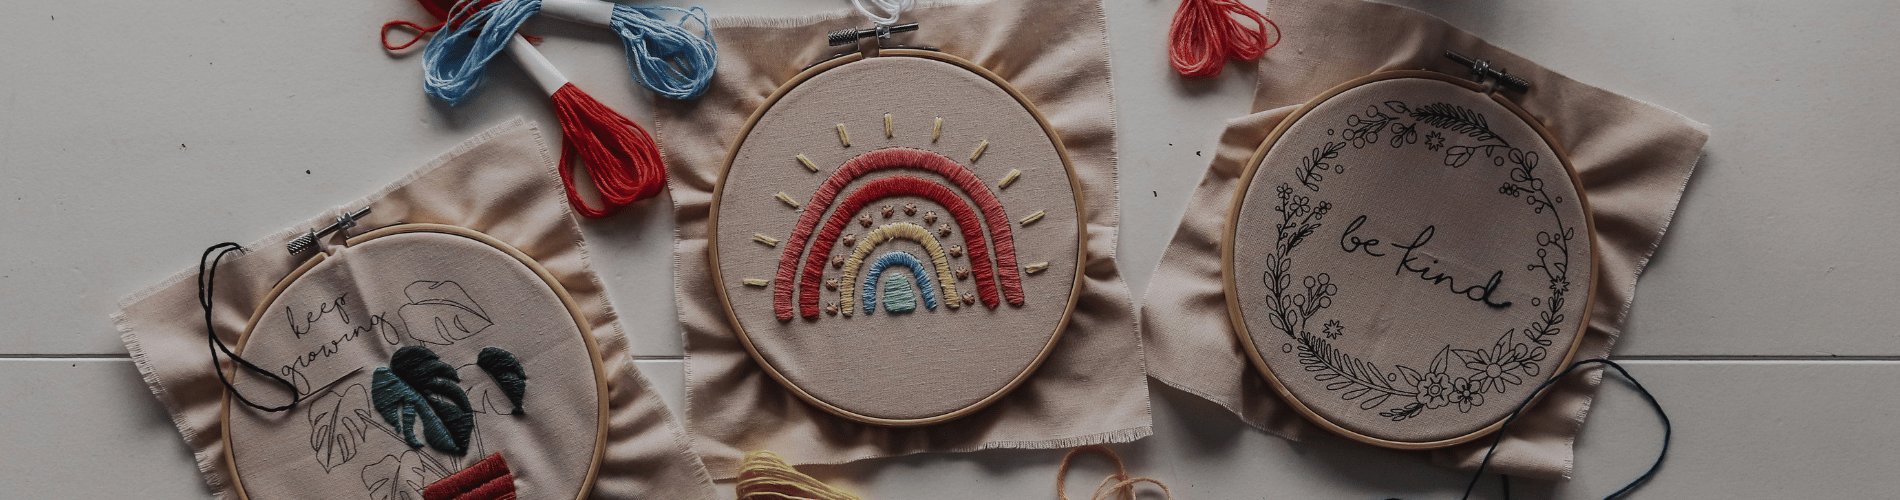 embroidery 1900x500.png